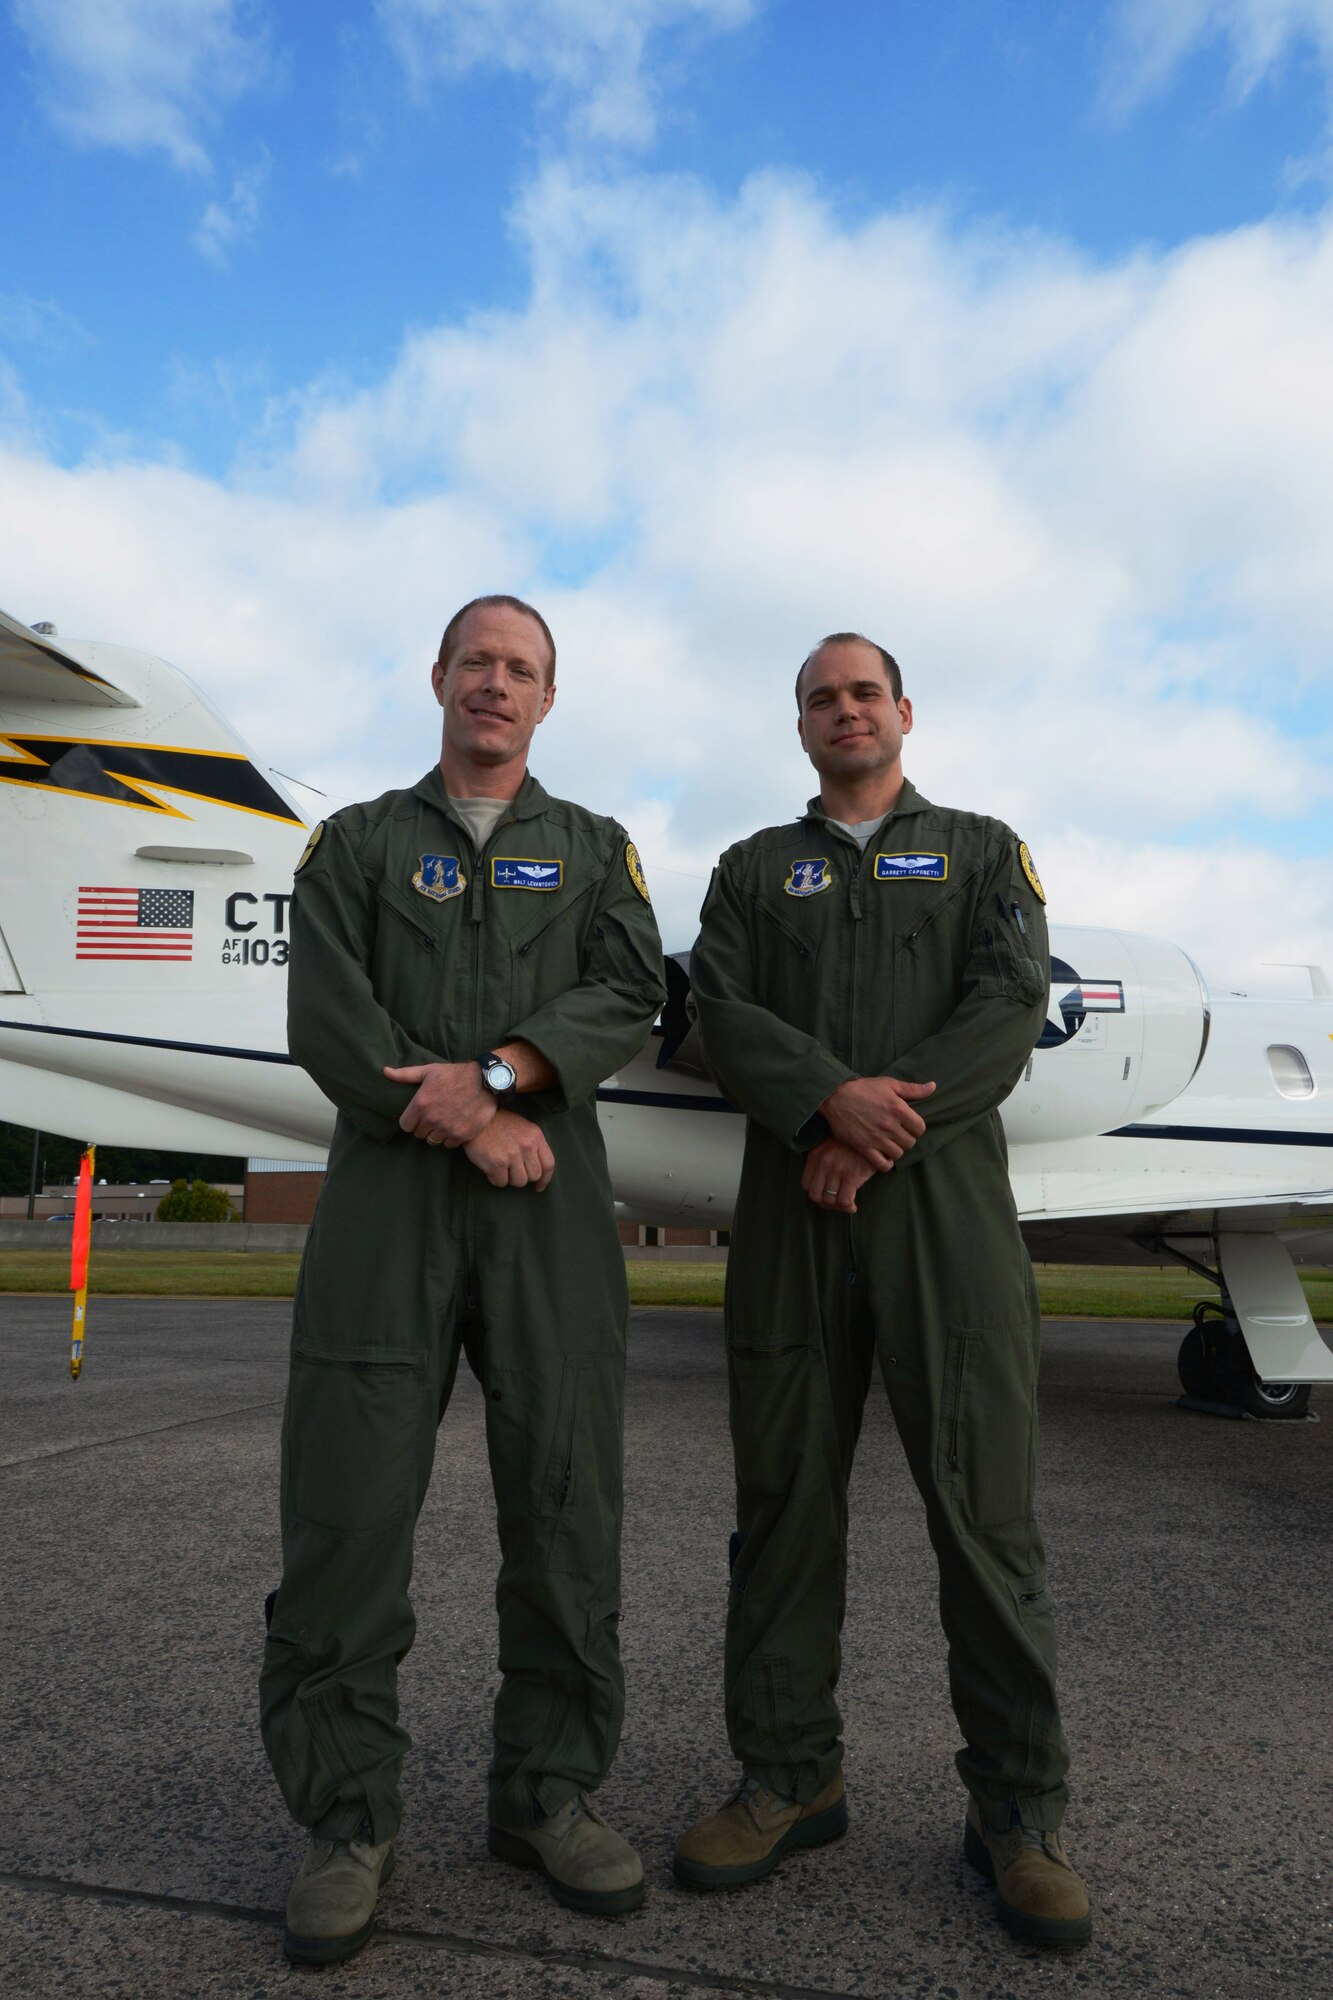 Lt. Col. Walt Levantovich and Capt. Garrett Caponetti, both pilots with the 103rd Airlift Wing, Connecticut Air National Guard, pose in front of one of the wing's C-21s at Bradley Air National Guard Base, East Granby, Conn., Sept. 8, 2013. Levantovich and Caponetti stopped at the scene of a multi-vehicle crash and rendered first aid to two children after rescuing them from an overturned vehicle September 6. The severity of the accident caused a shutdown of all southbound traffic on I-91 in Windsor, Conn. (U.S. Air National Guard photo by Senior Airman Jennifer Pierce)